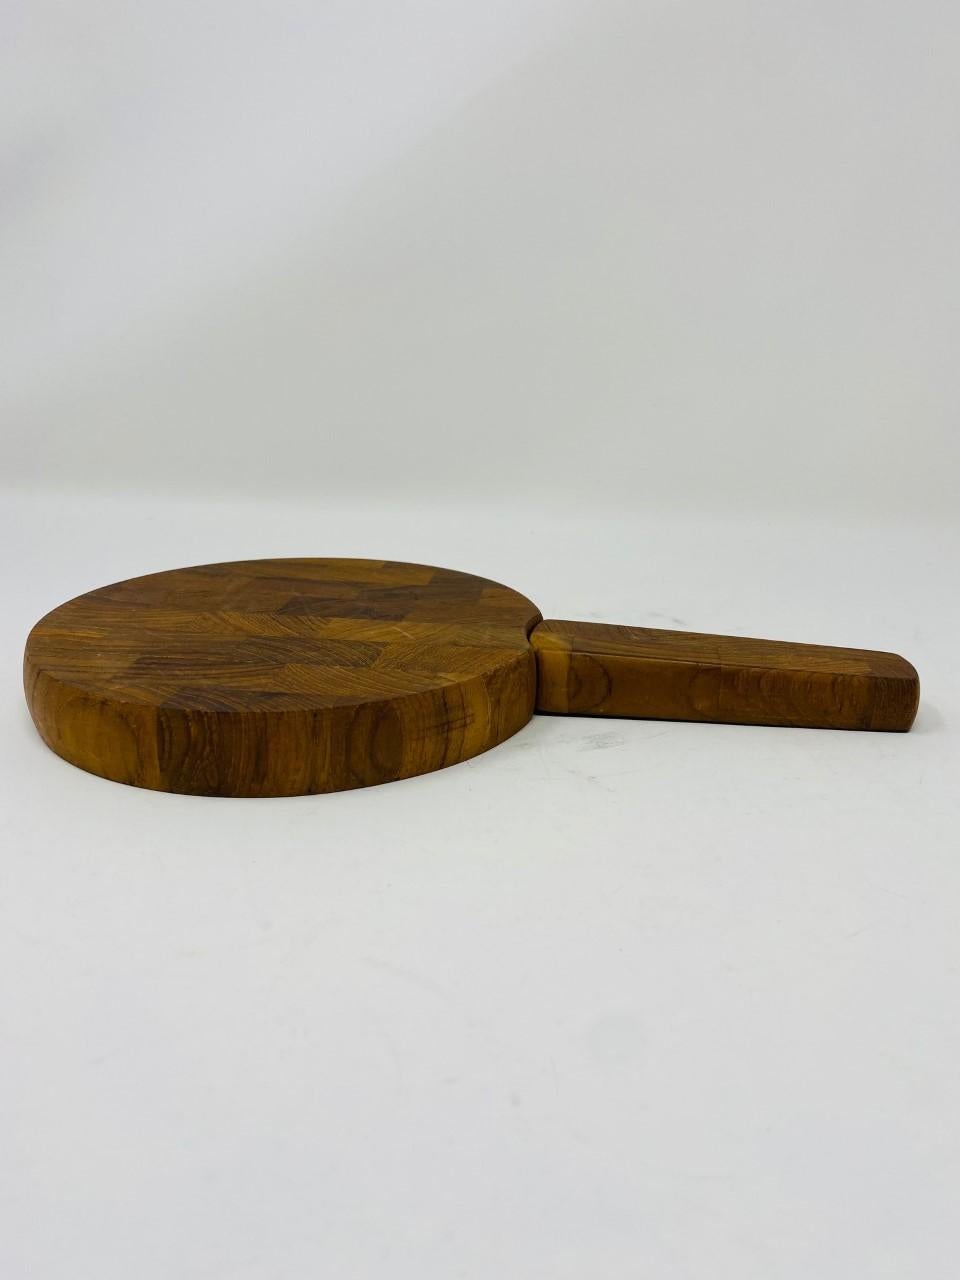 Jens Quistgaard for Dansk Teak Cheese Cutting Board with Built in Knife, 1960s In Good Condition For Sale In San Diego, CA